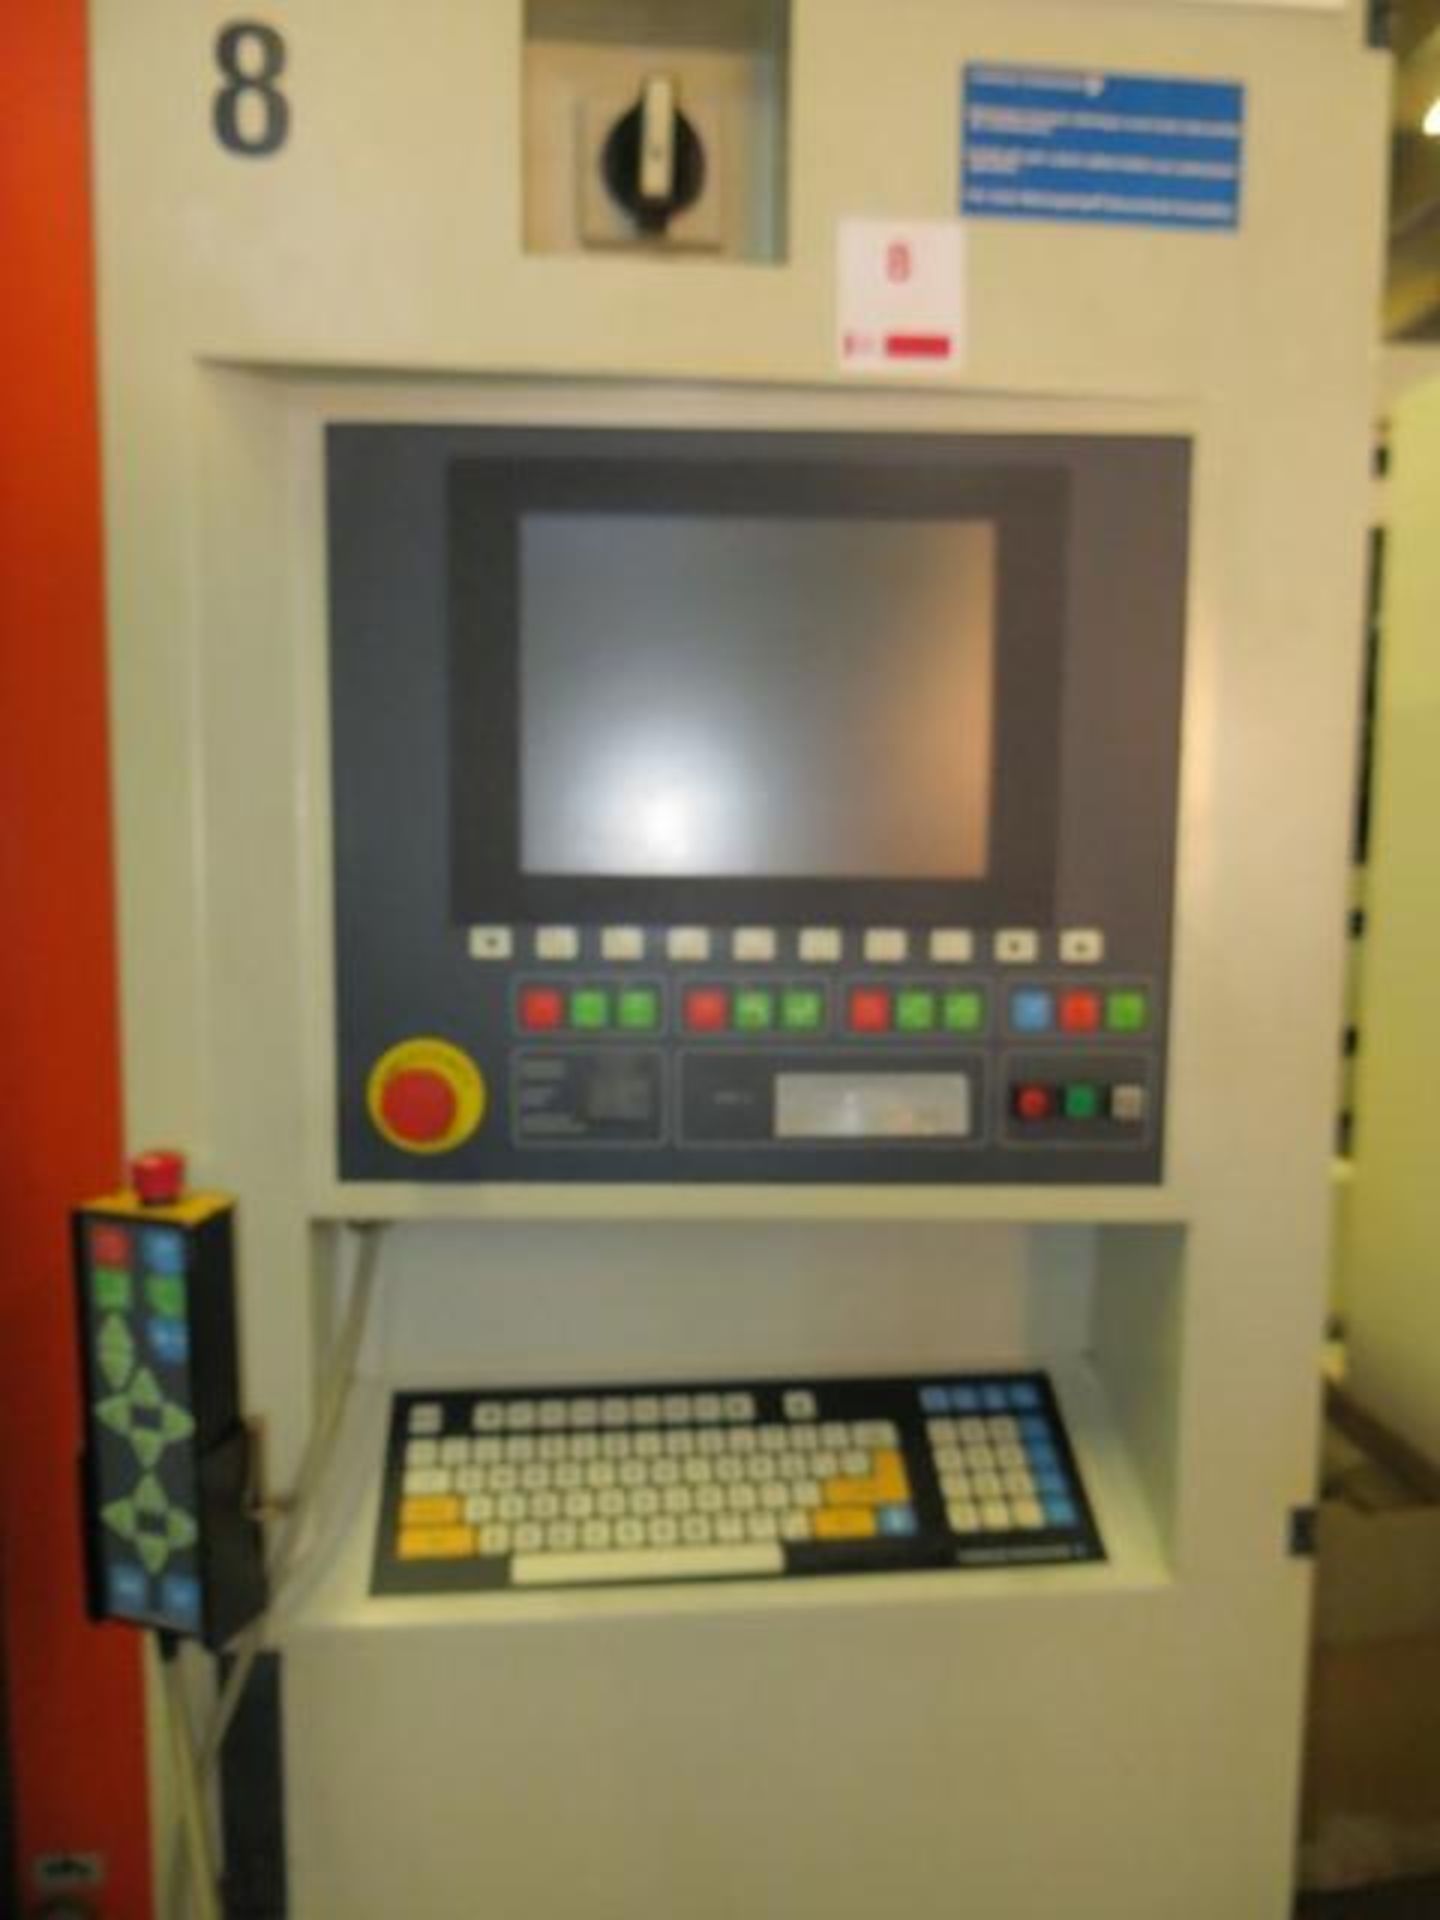 Charmilles Robofil 290 EMV wire eroder Year: 1997 Serial no. 7.20957330590 c/w two tool chests - Image 3 of 9